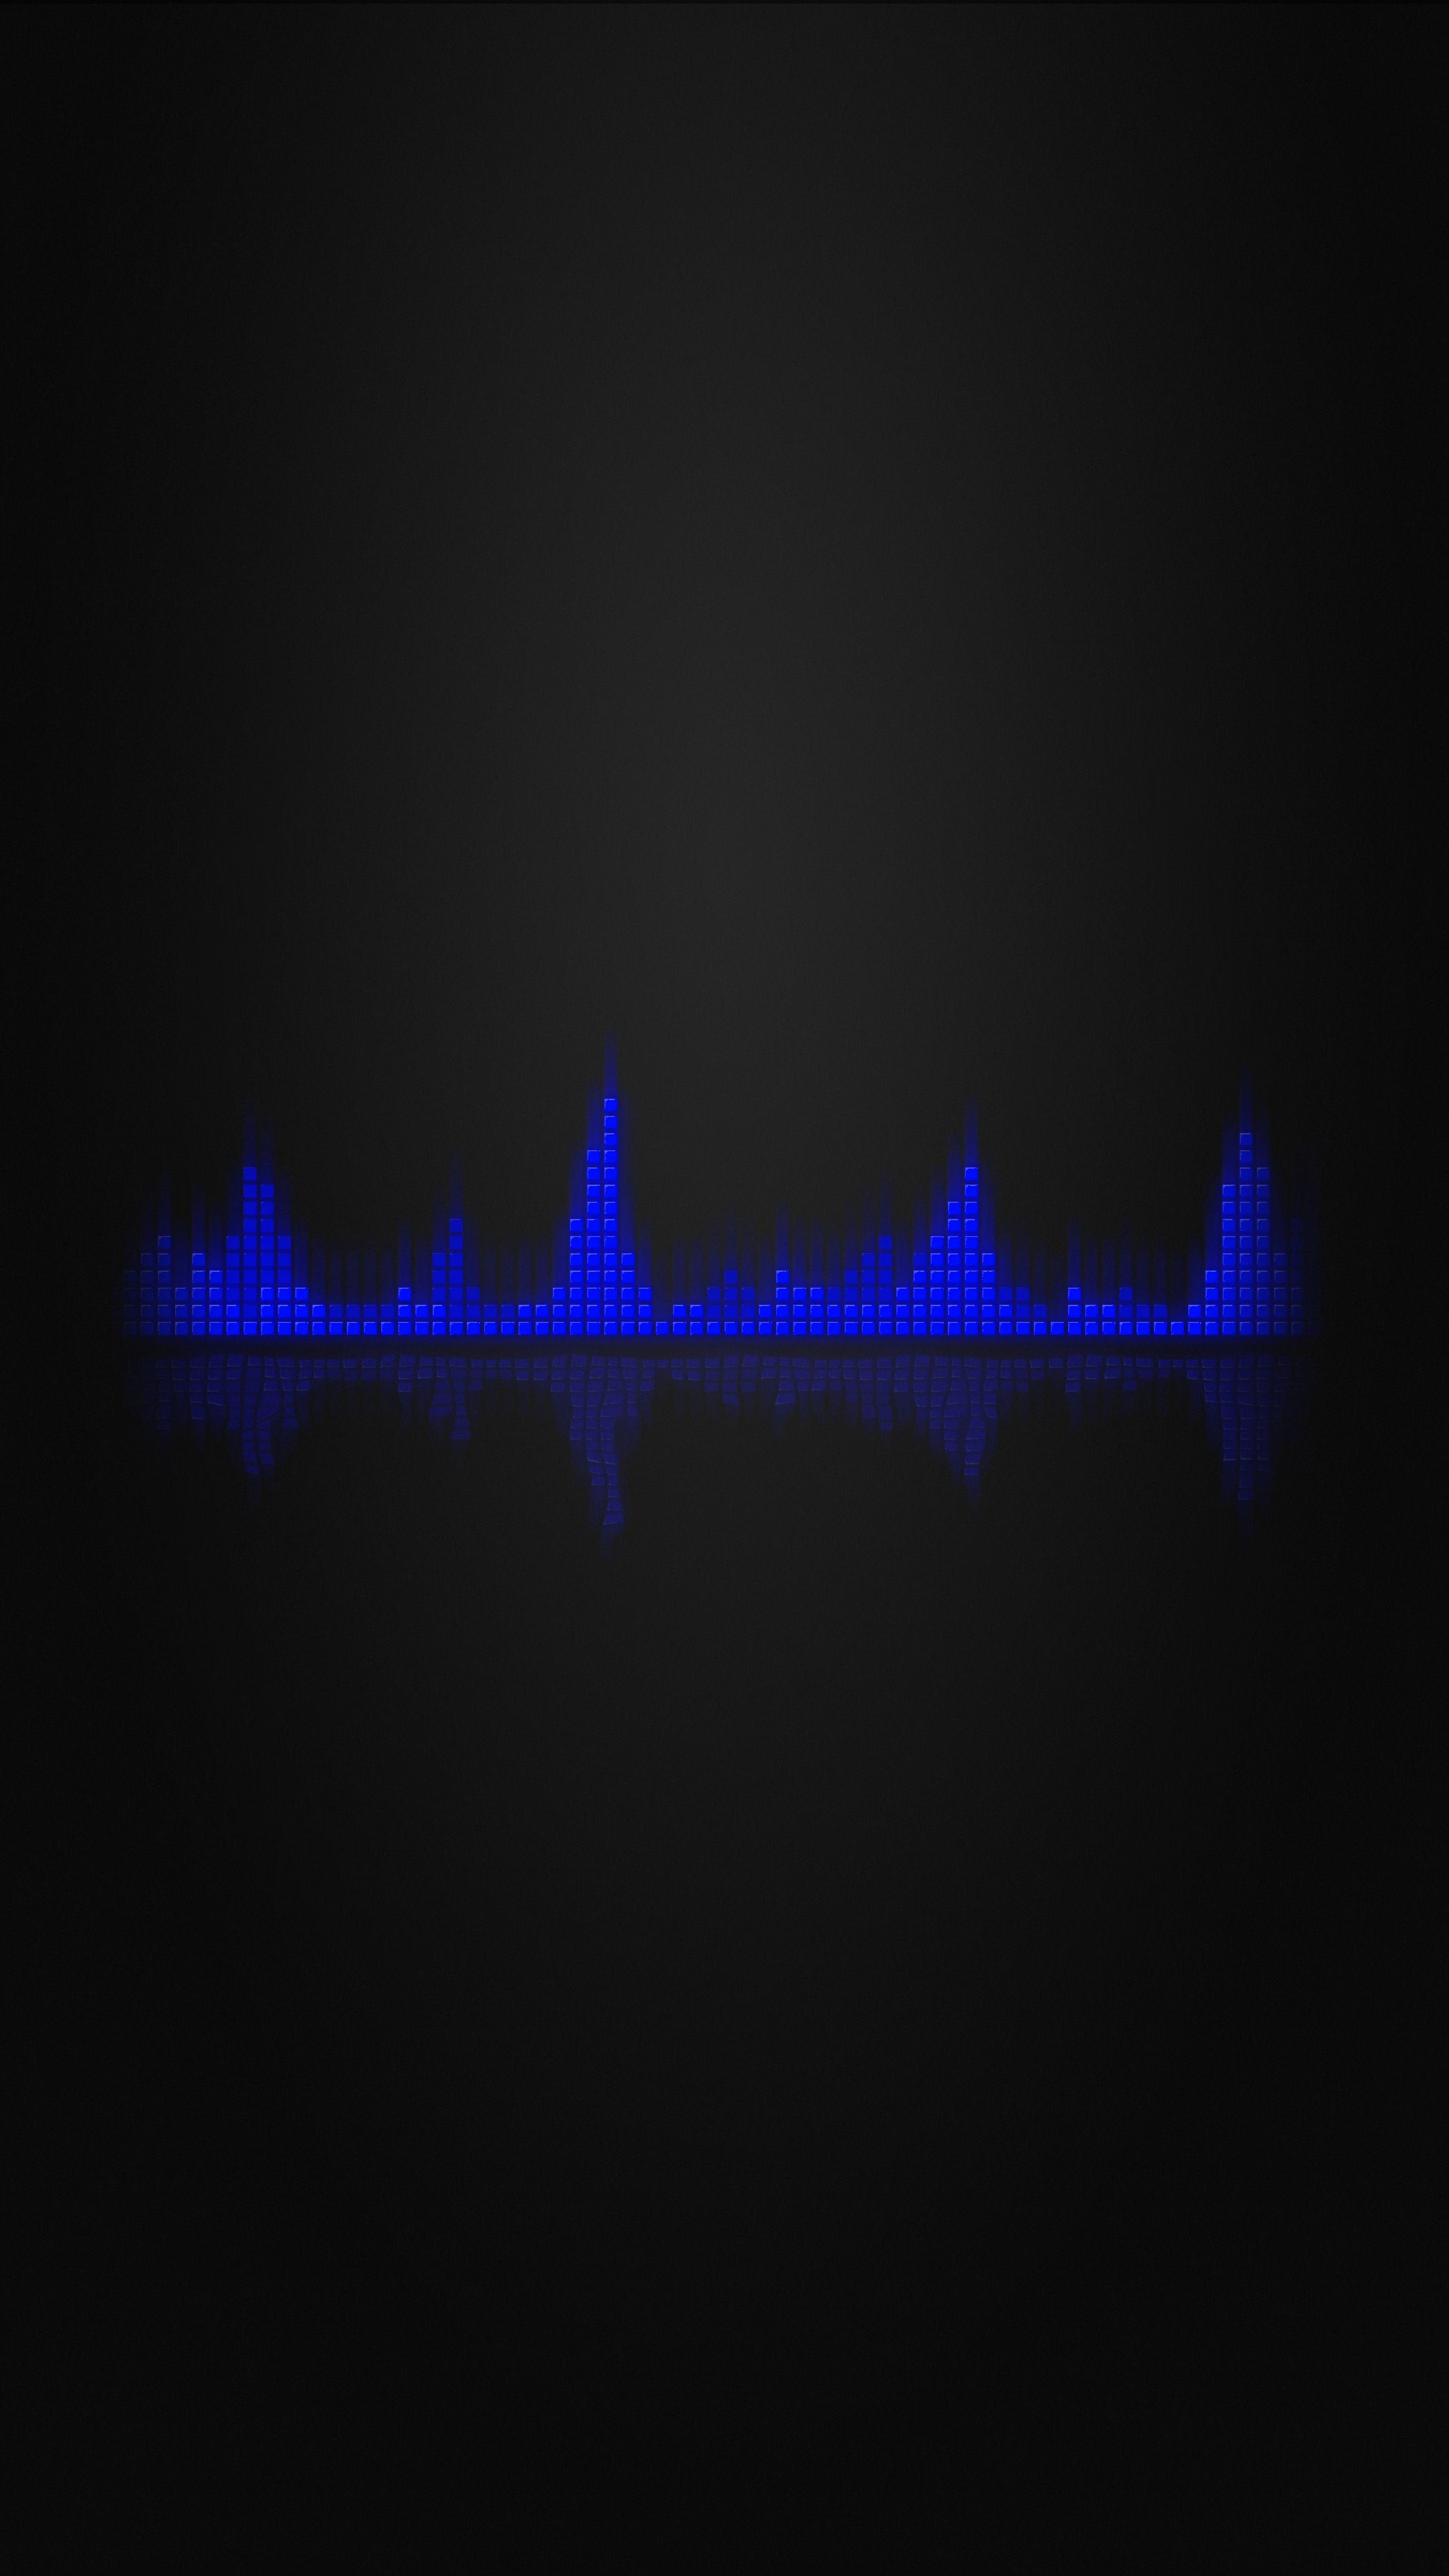 blue, abstract, black, equalizer, music